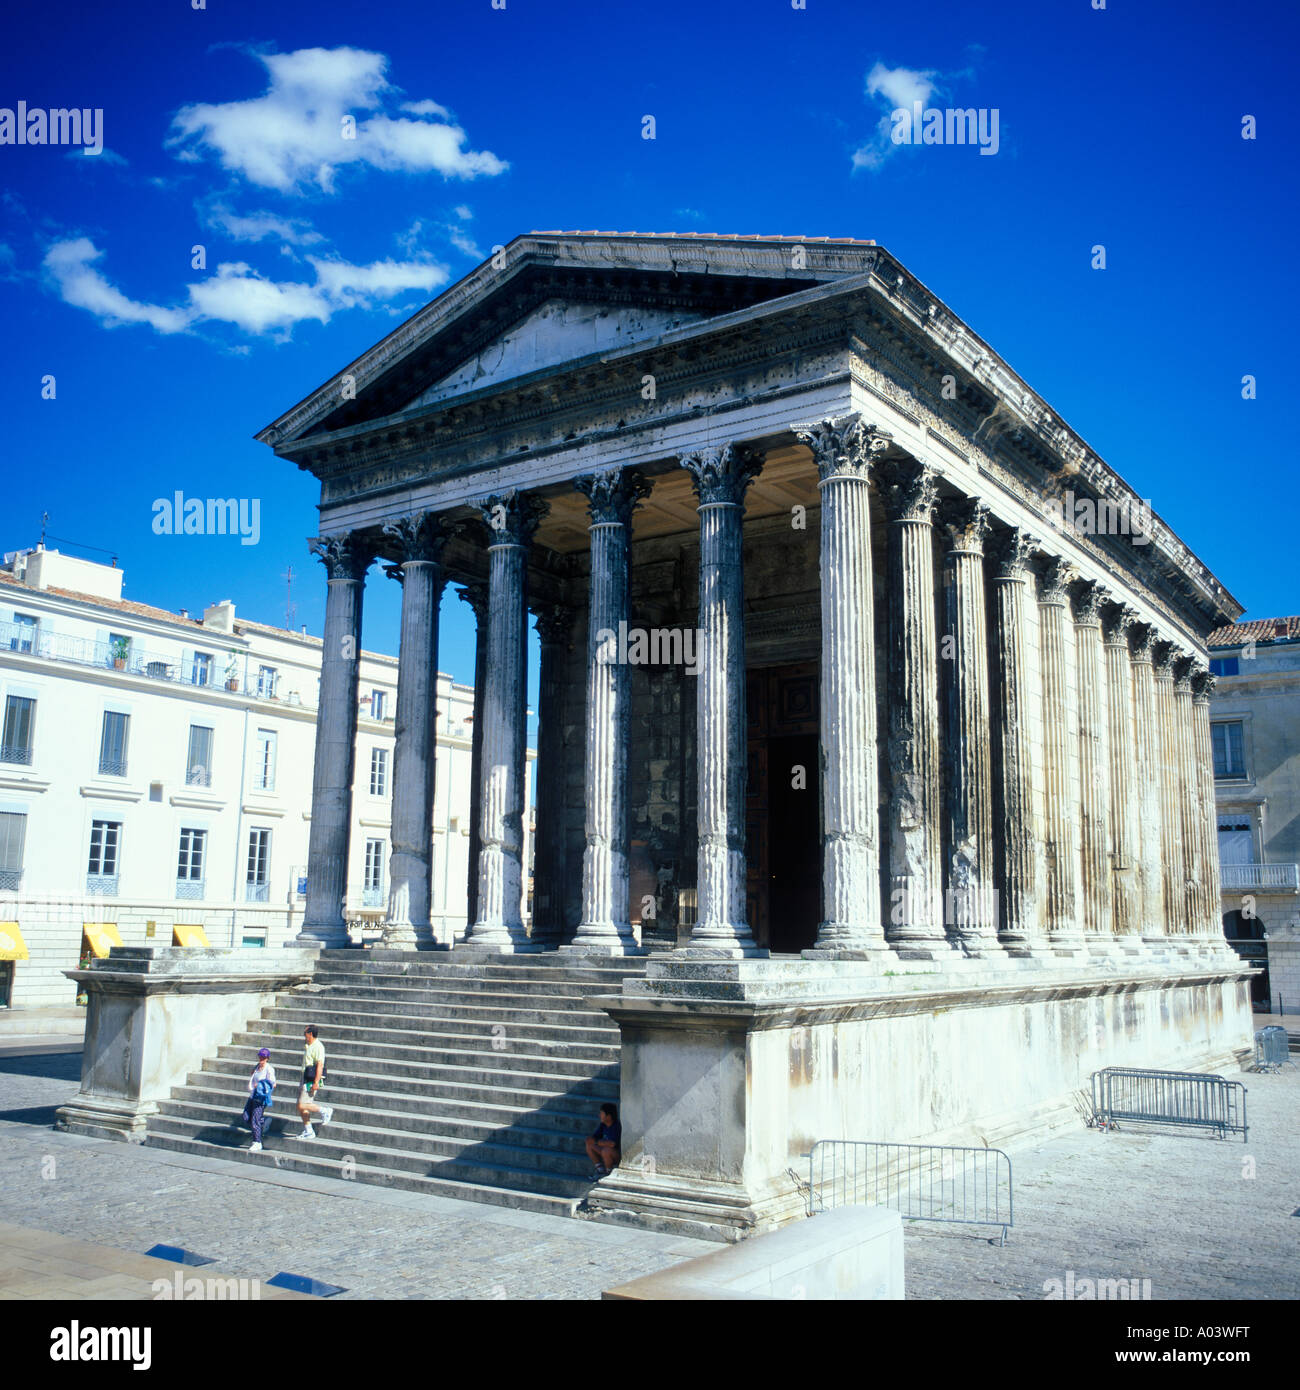 Maison Carrée in Nimes in the South of France Stock Photo